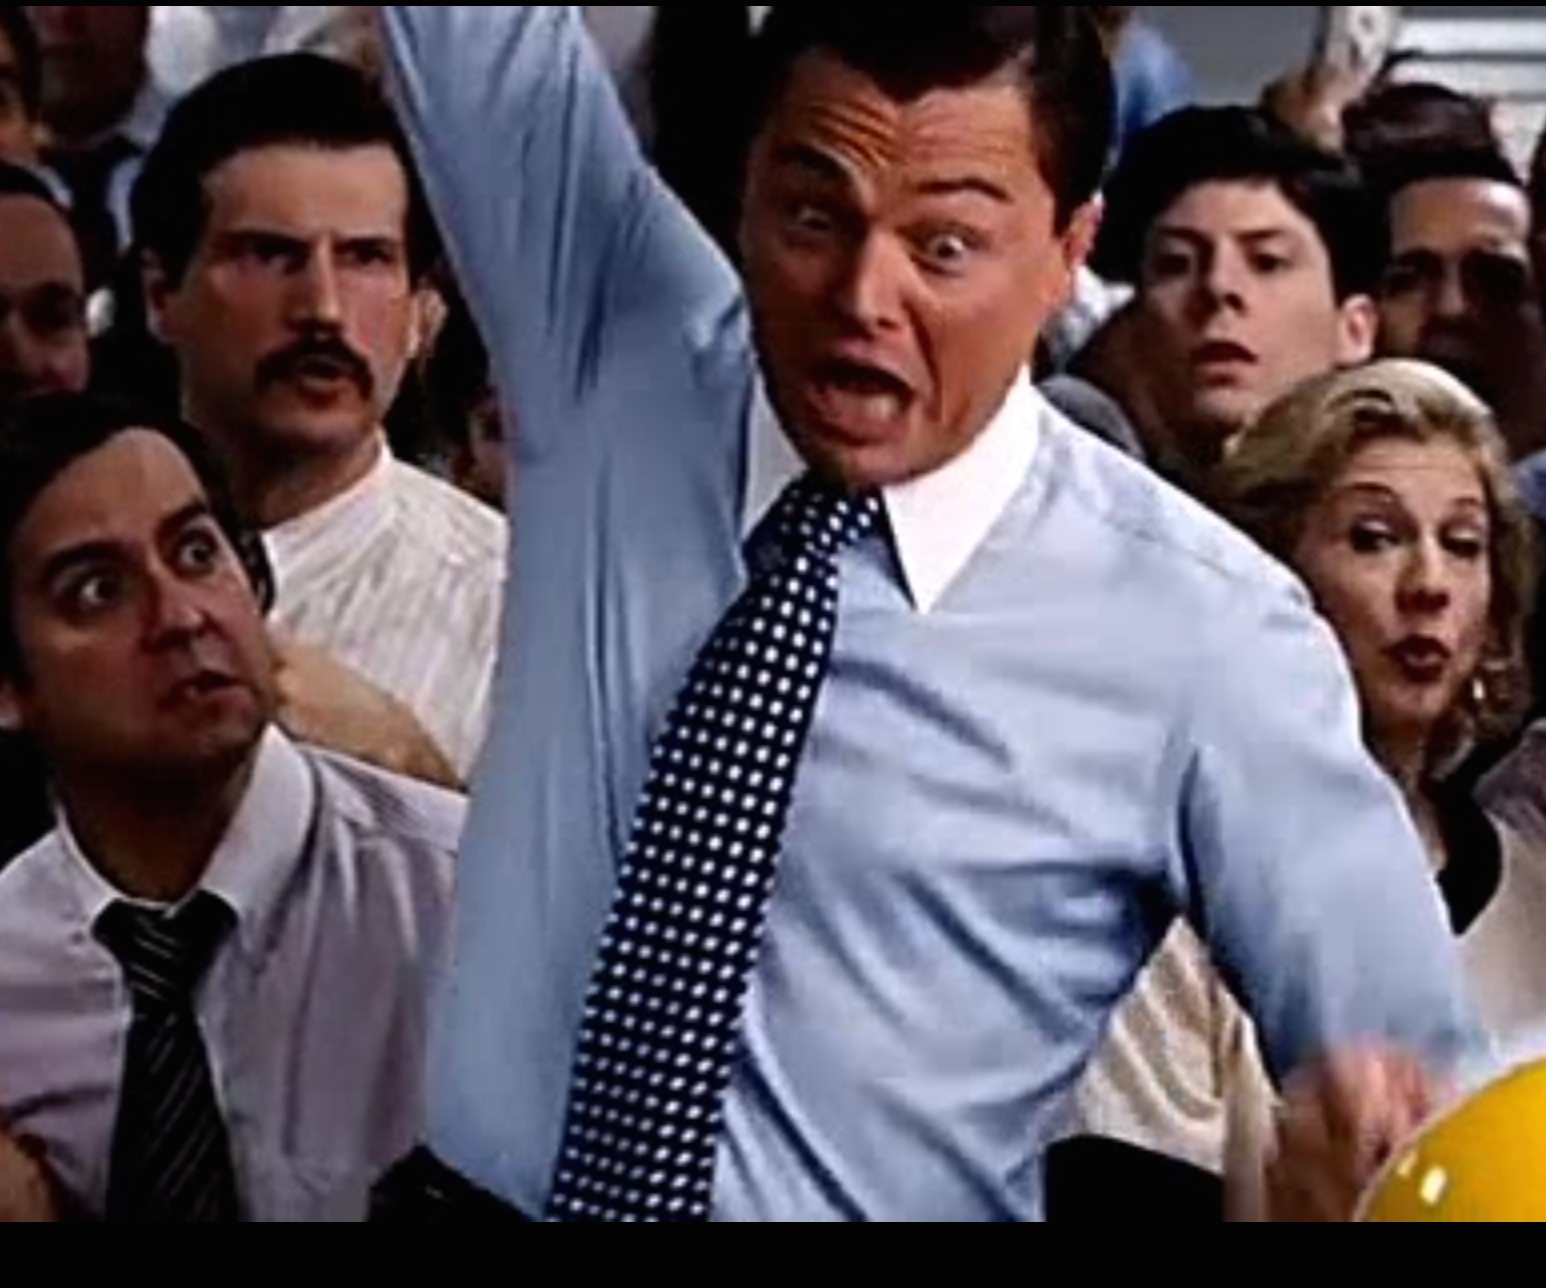 The Wolf of Wallstreet: The Little Person Toss